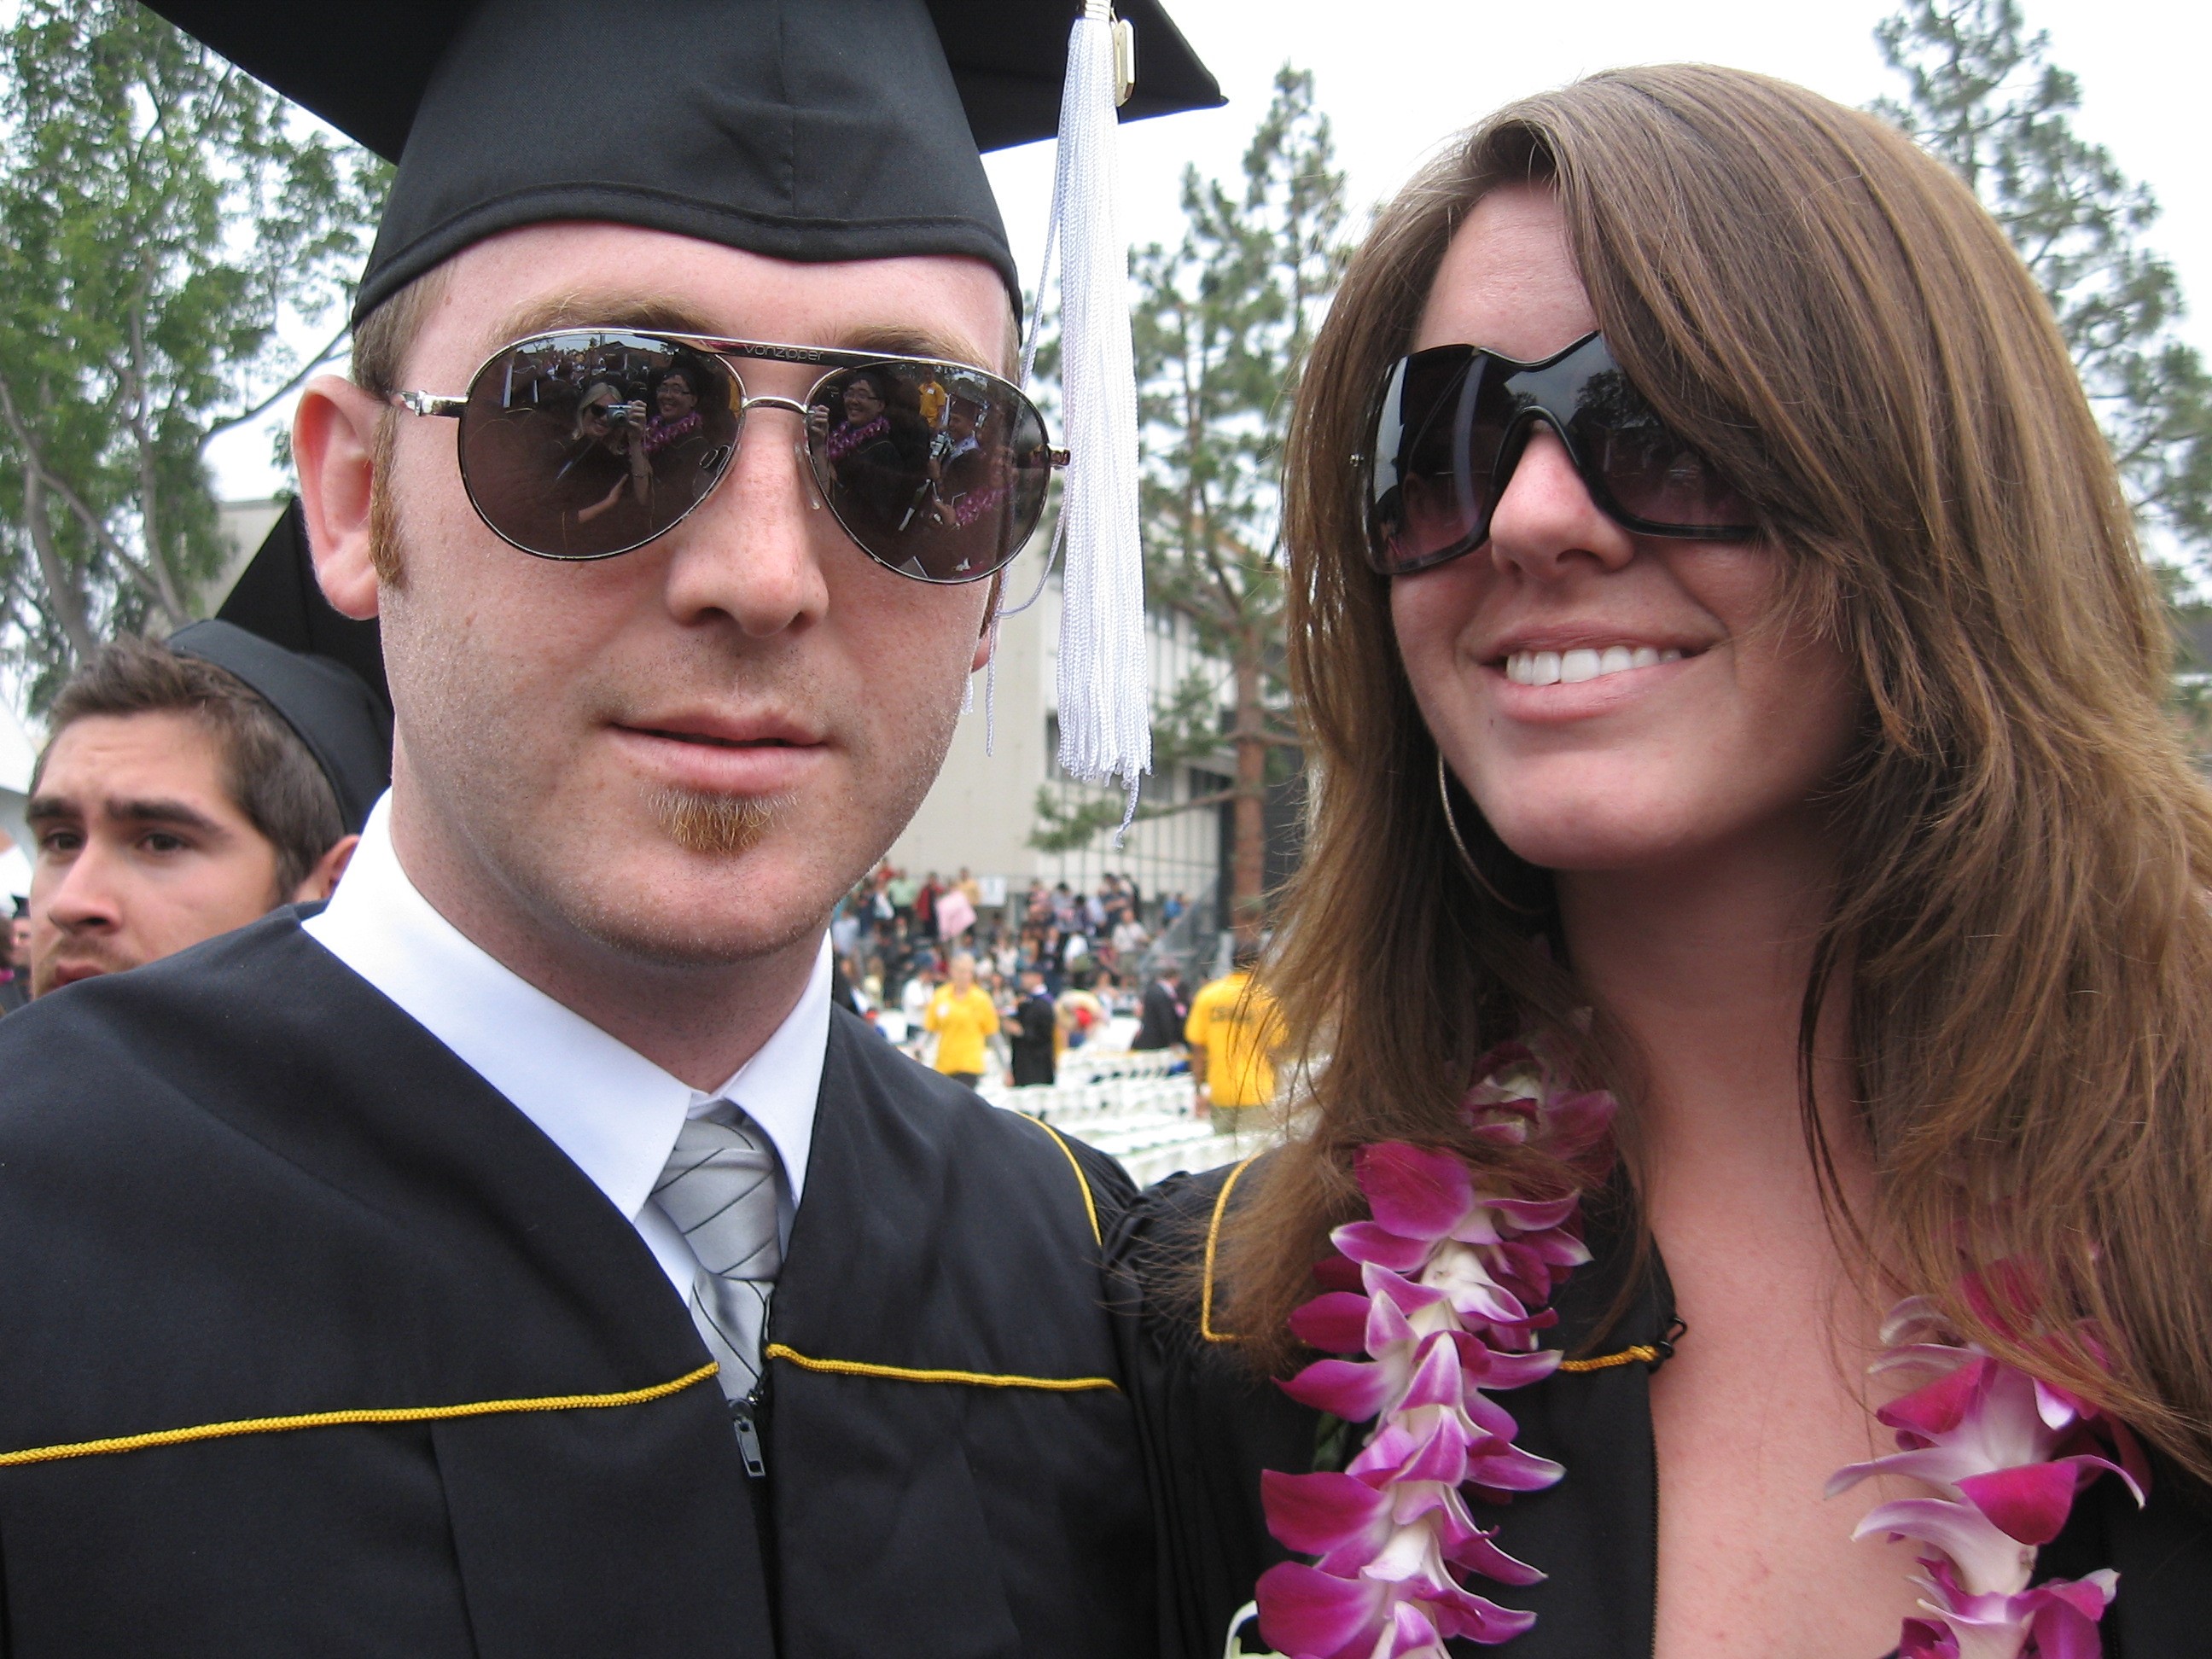  couple at Commencement